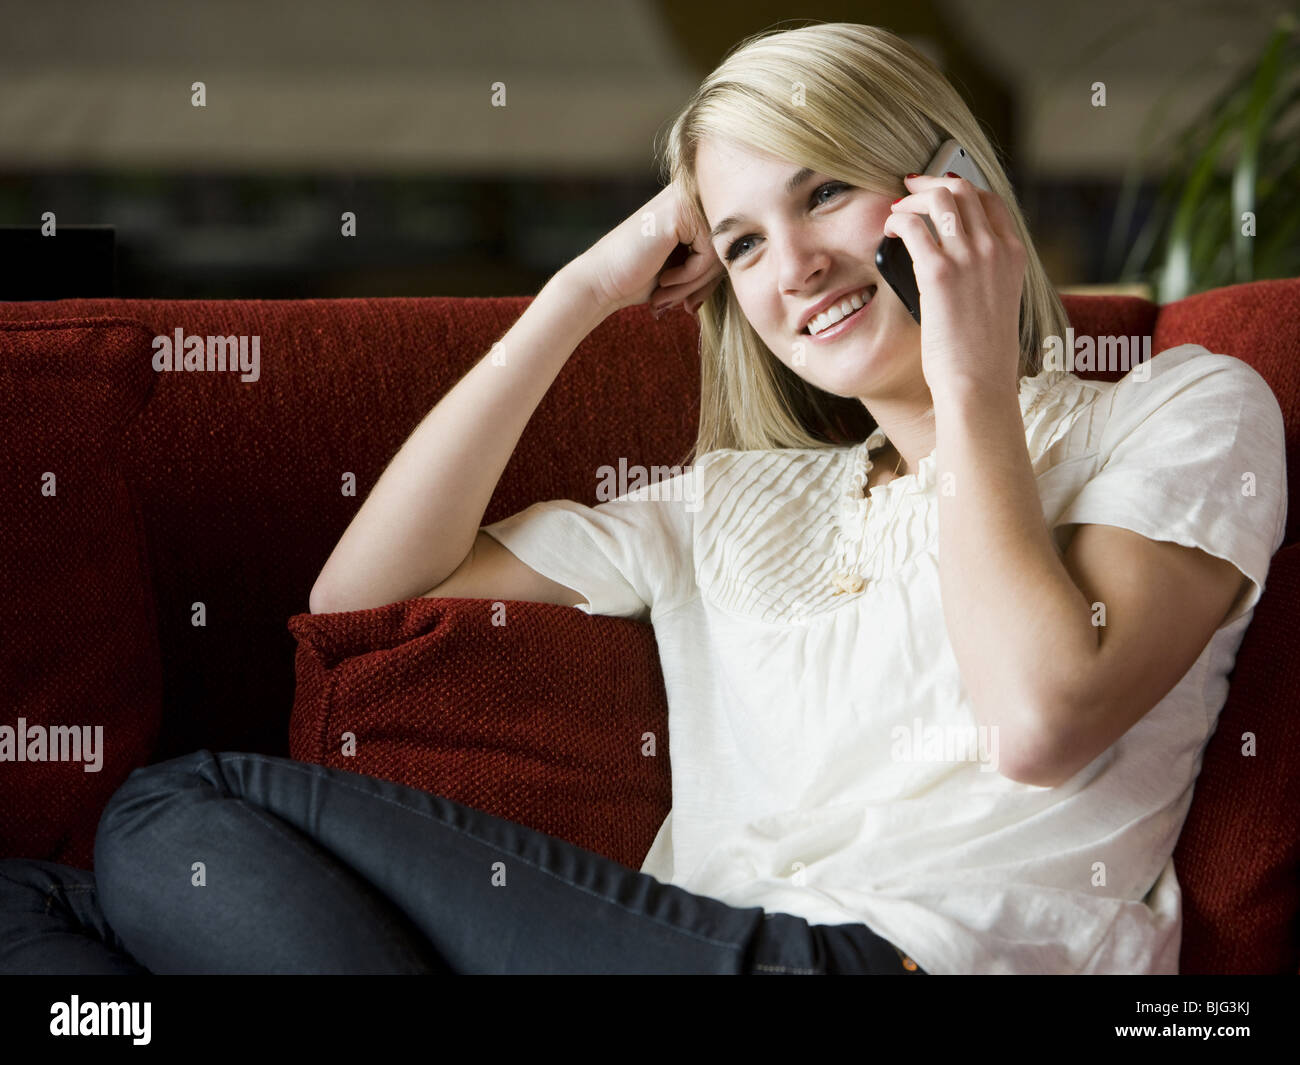 woman using her cell phone on a red sofa Stock Photo